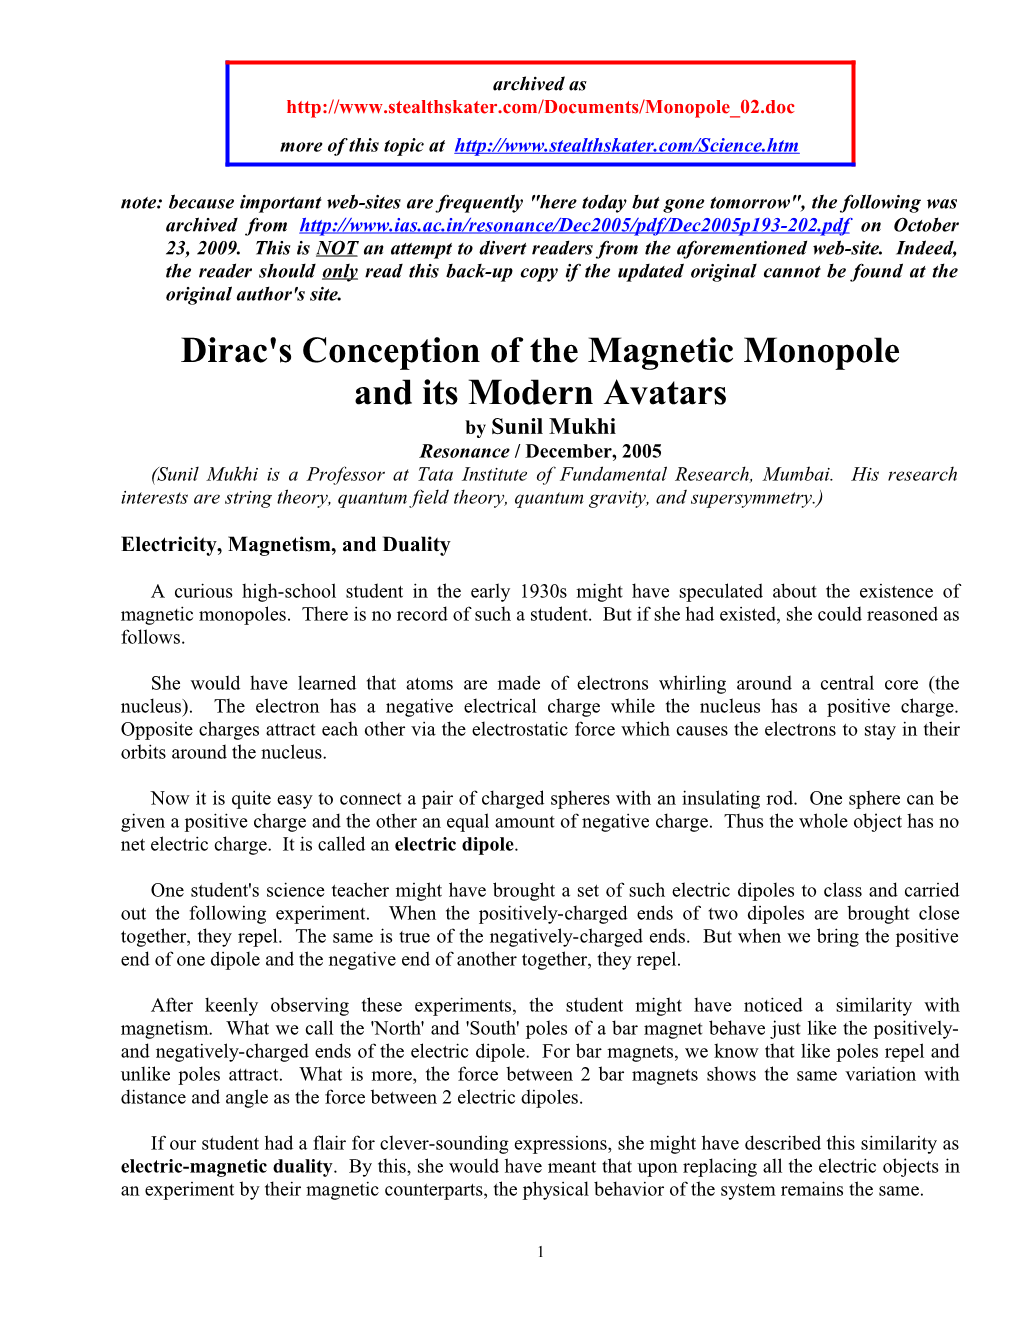 Dirac's Conception of the Magnetic Monopole